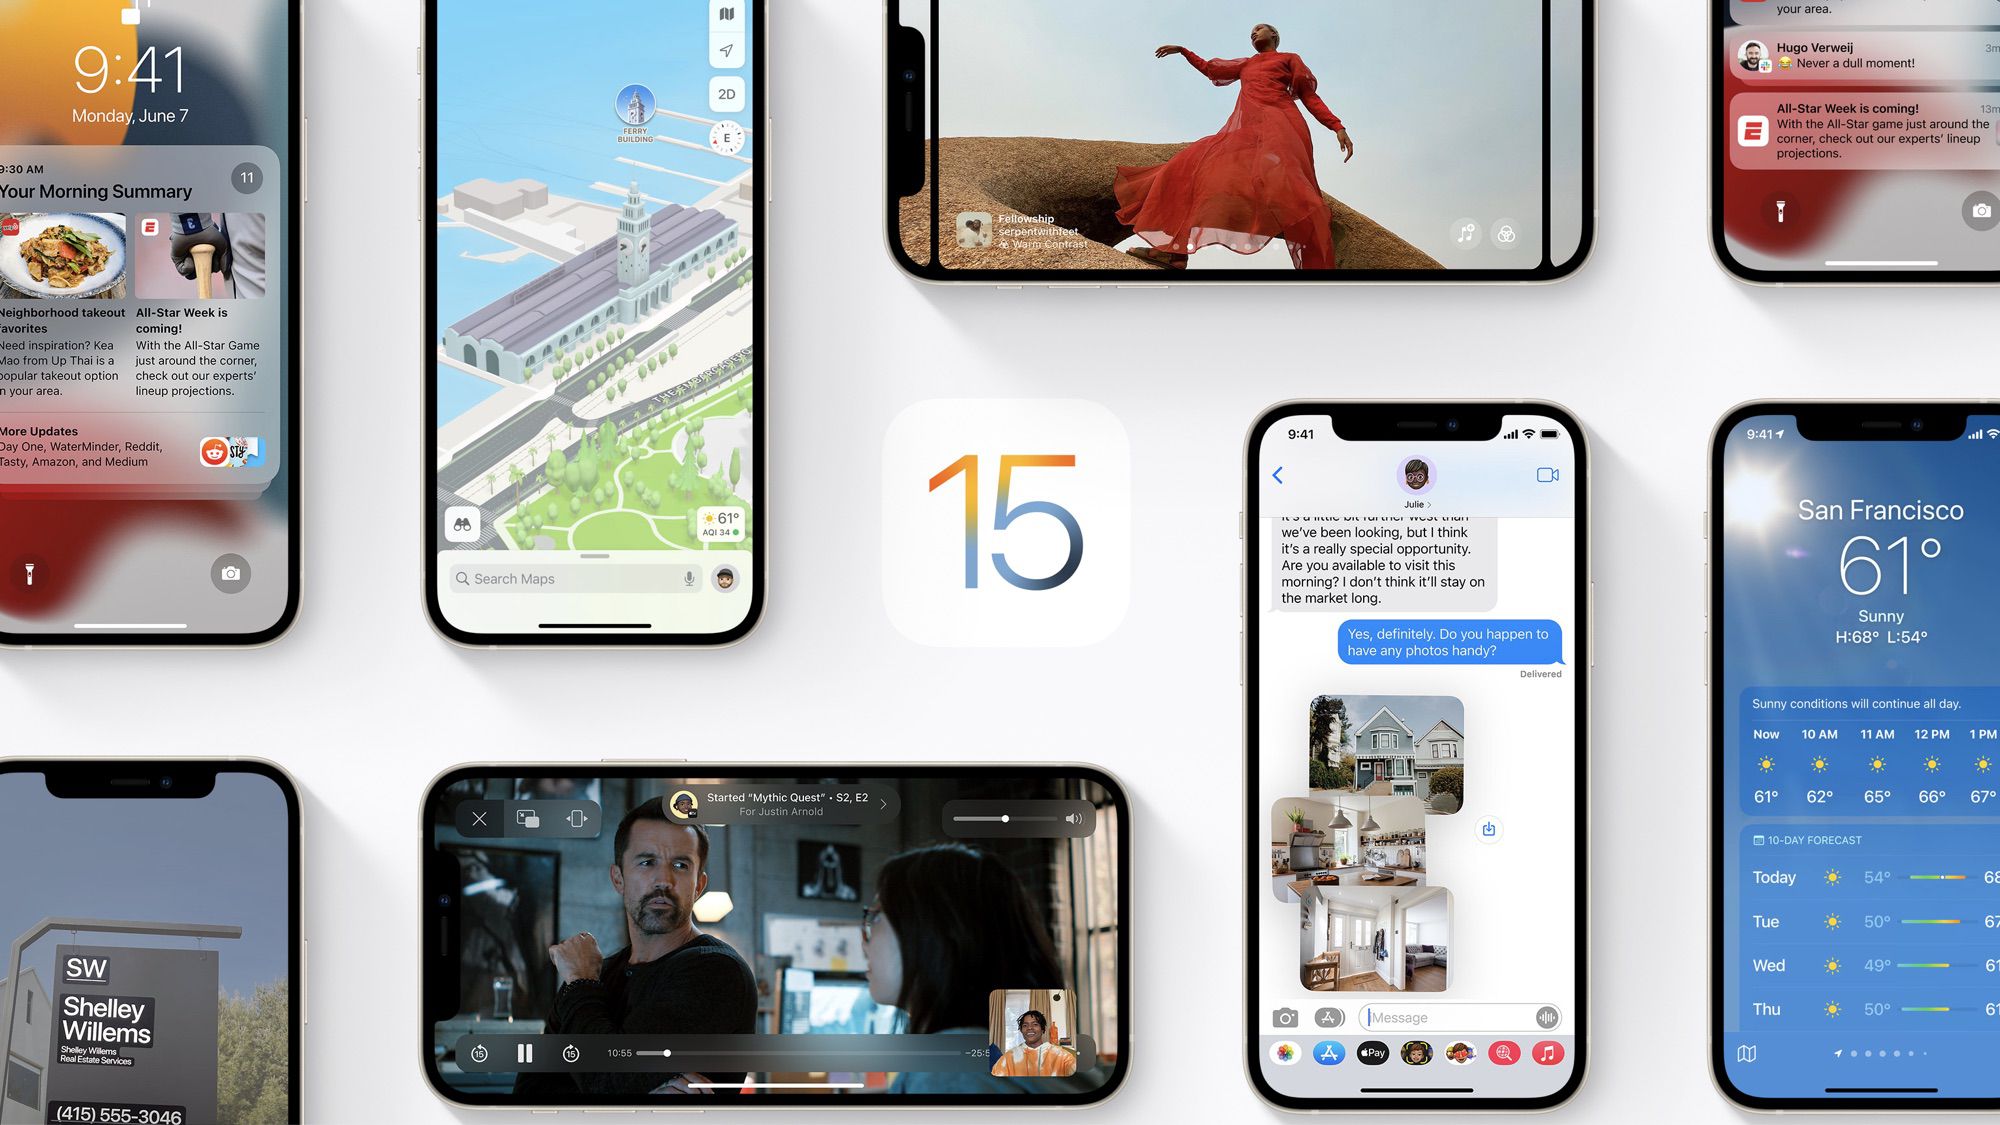 iOS 15 Compatible With All iPhones That Run iOS 14 - MacRumors